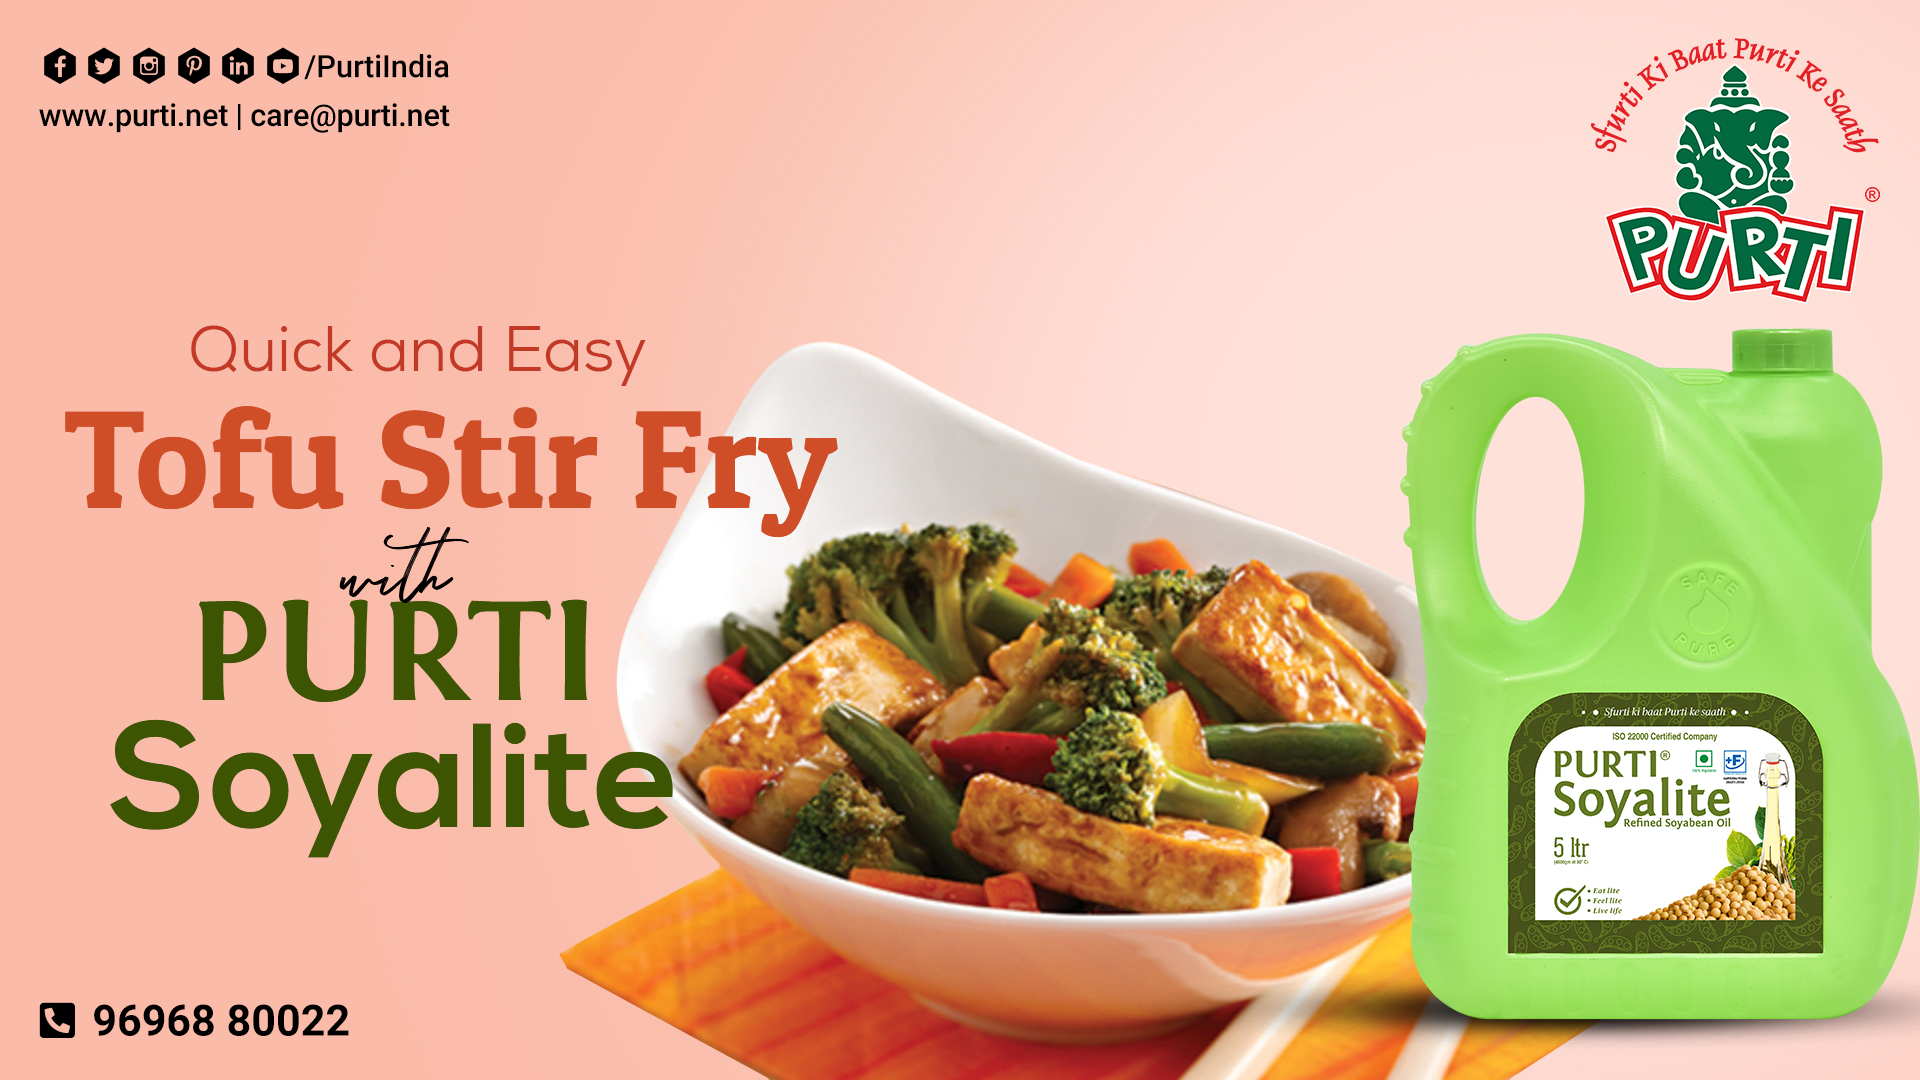 Quick and Easy Tofu Stir-Fry with Purti Soyalite Refined Soyabean Oil